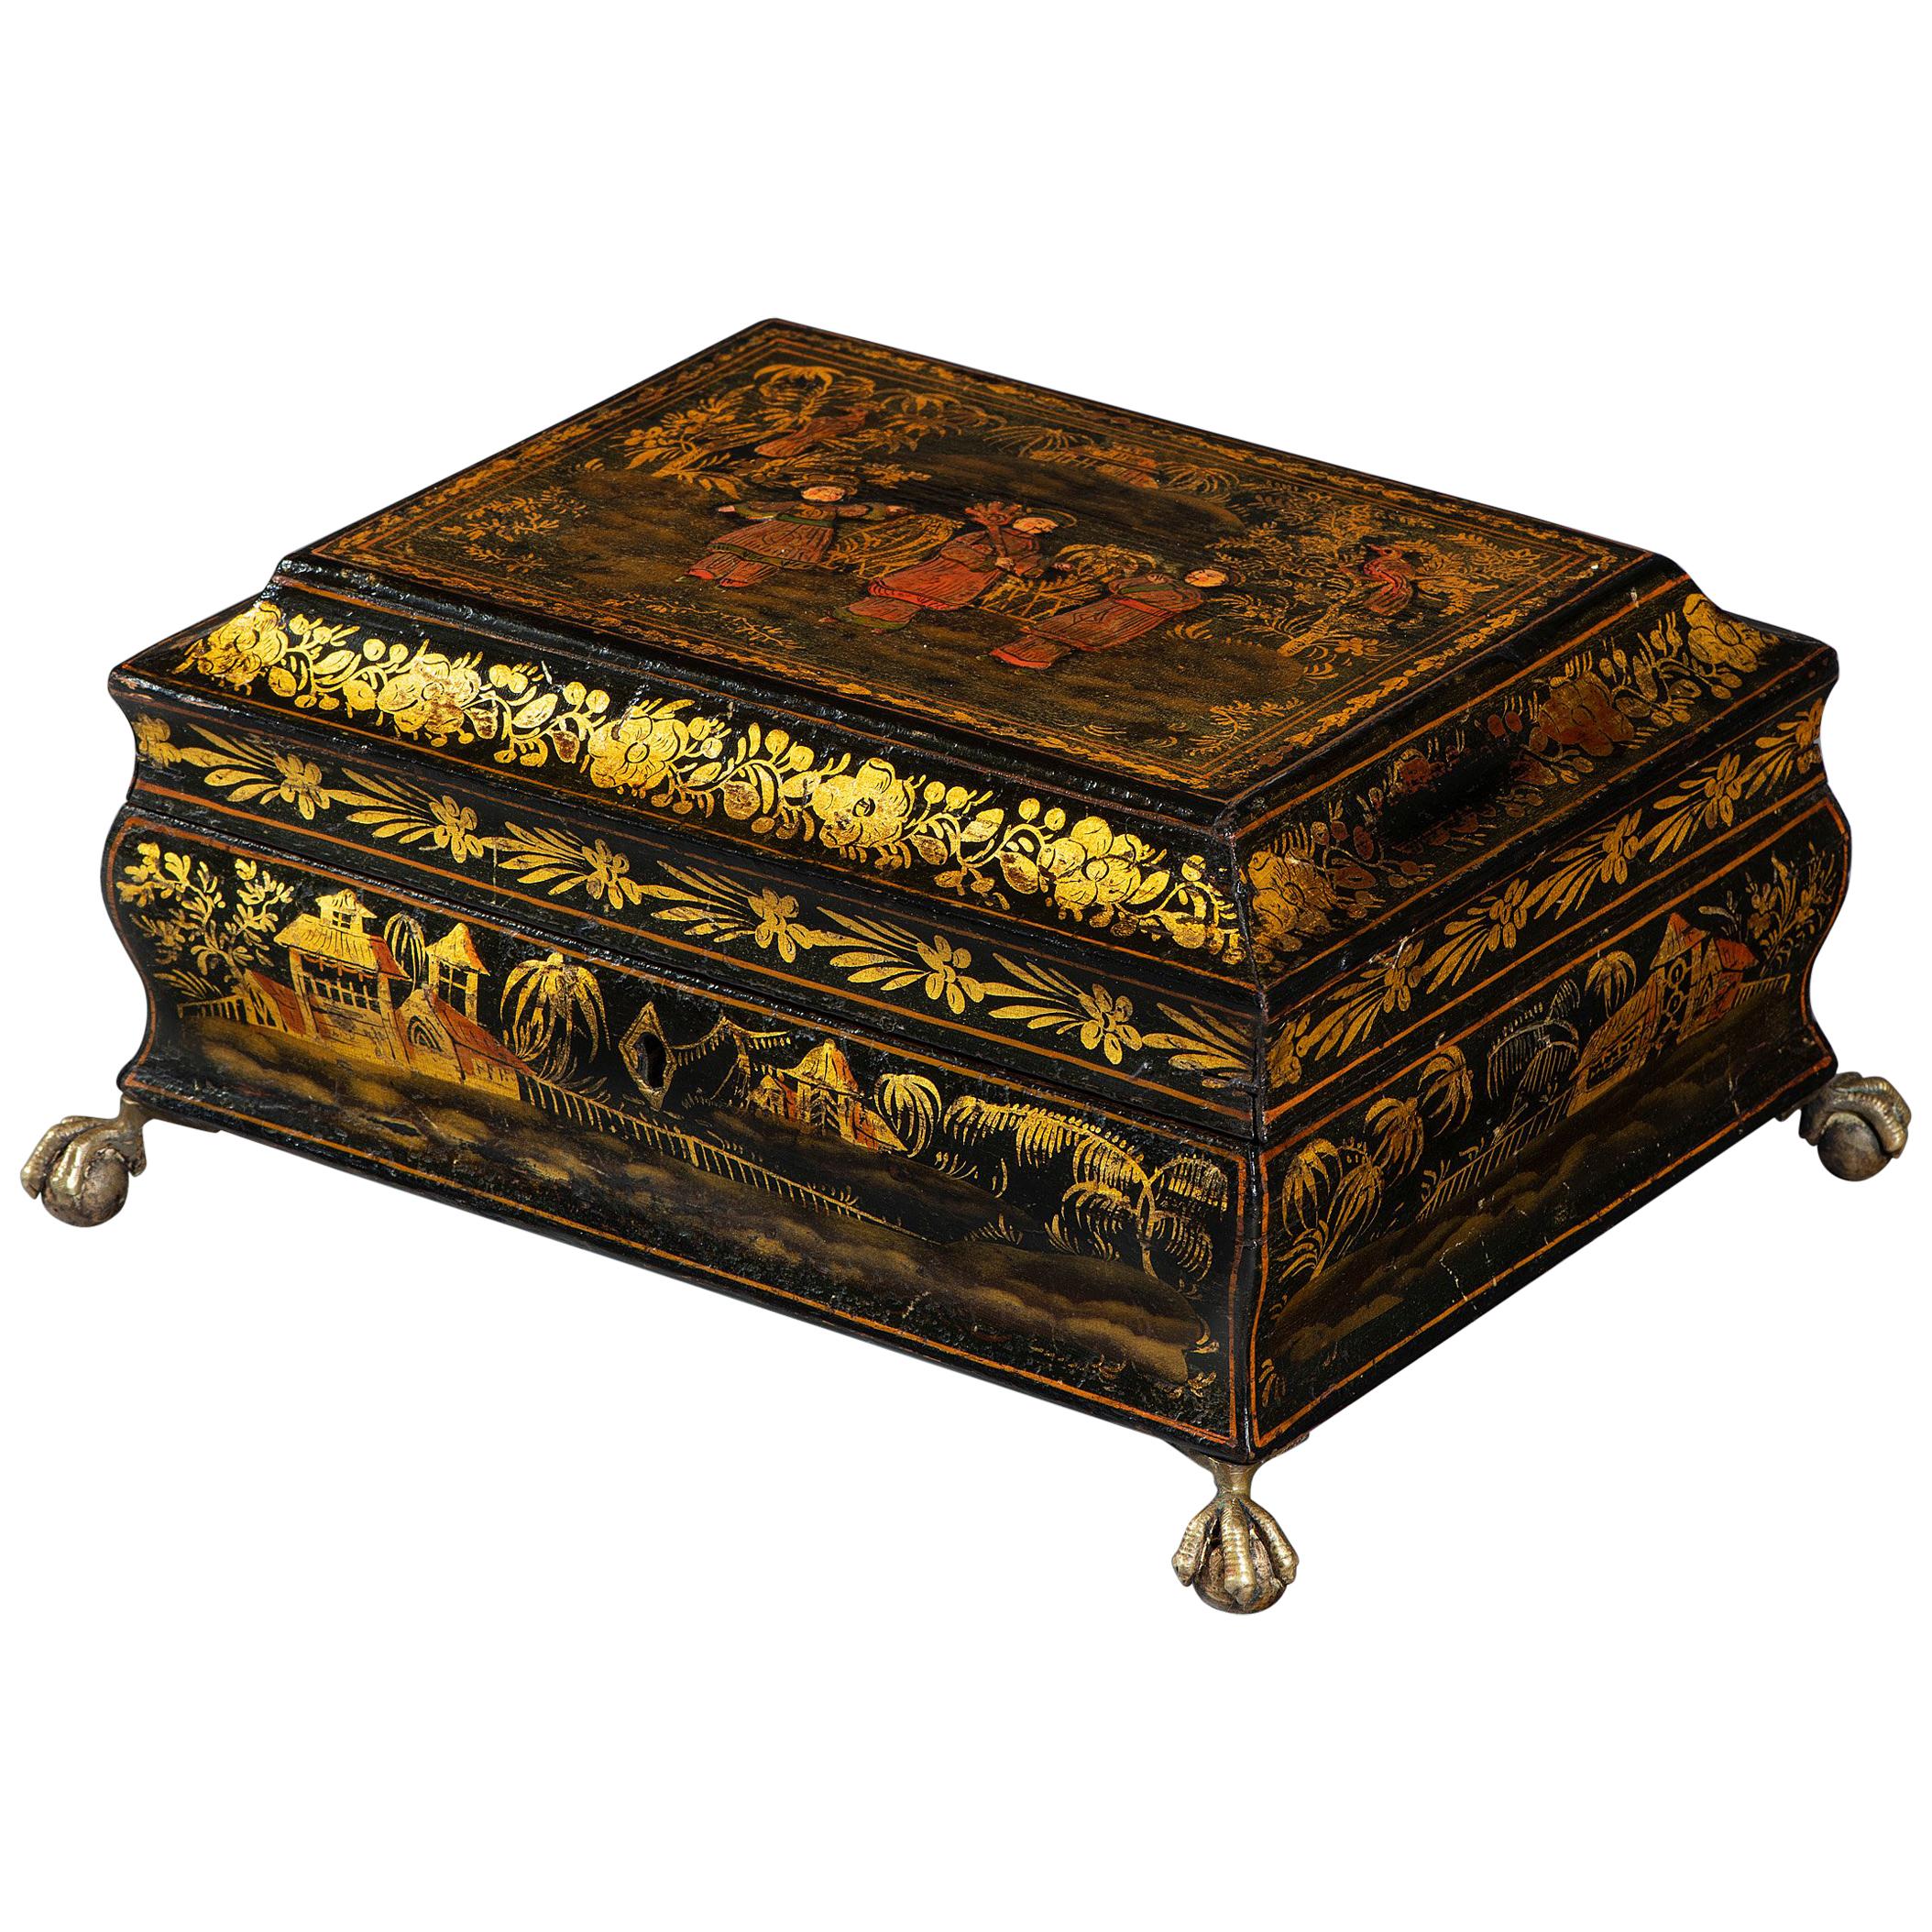 Early 19th Century Regency Period Japanned and Chinoiserie Lacquered Casket For Sale